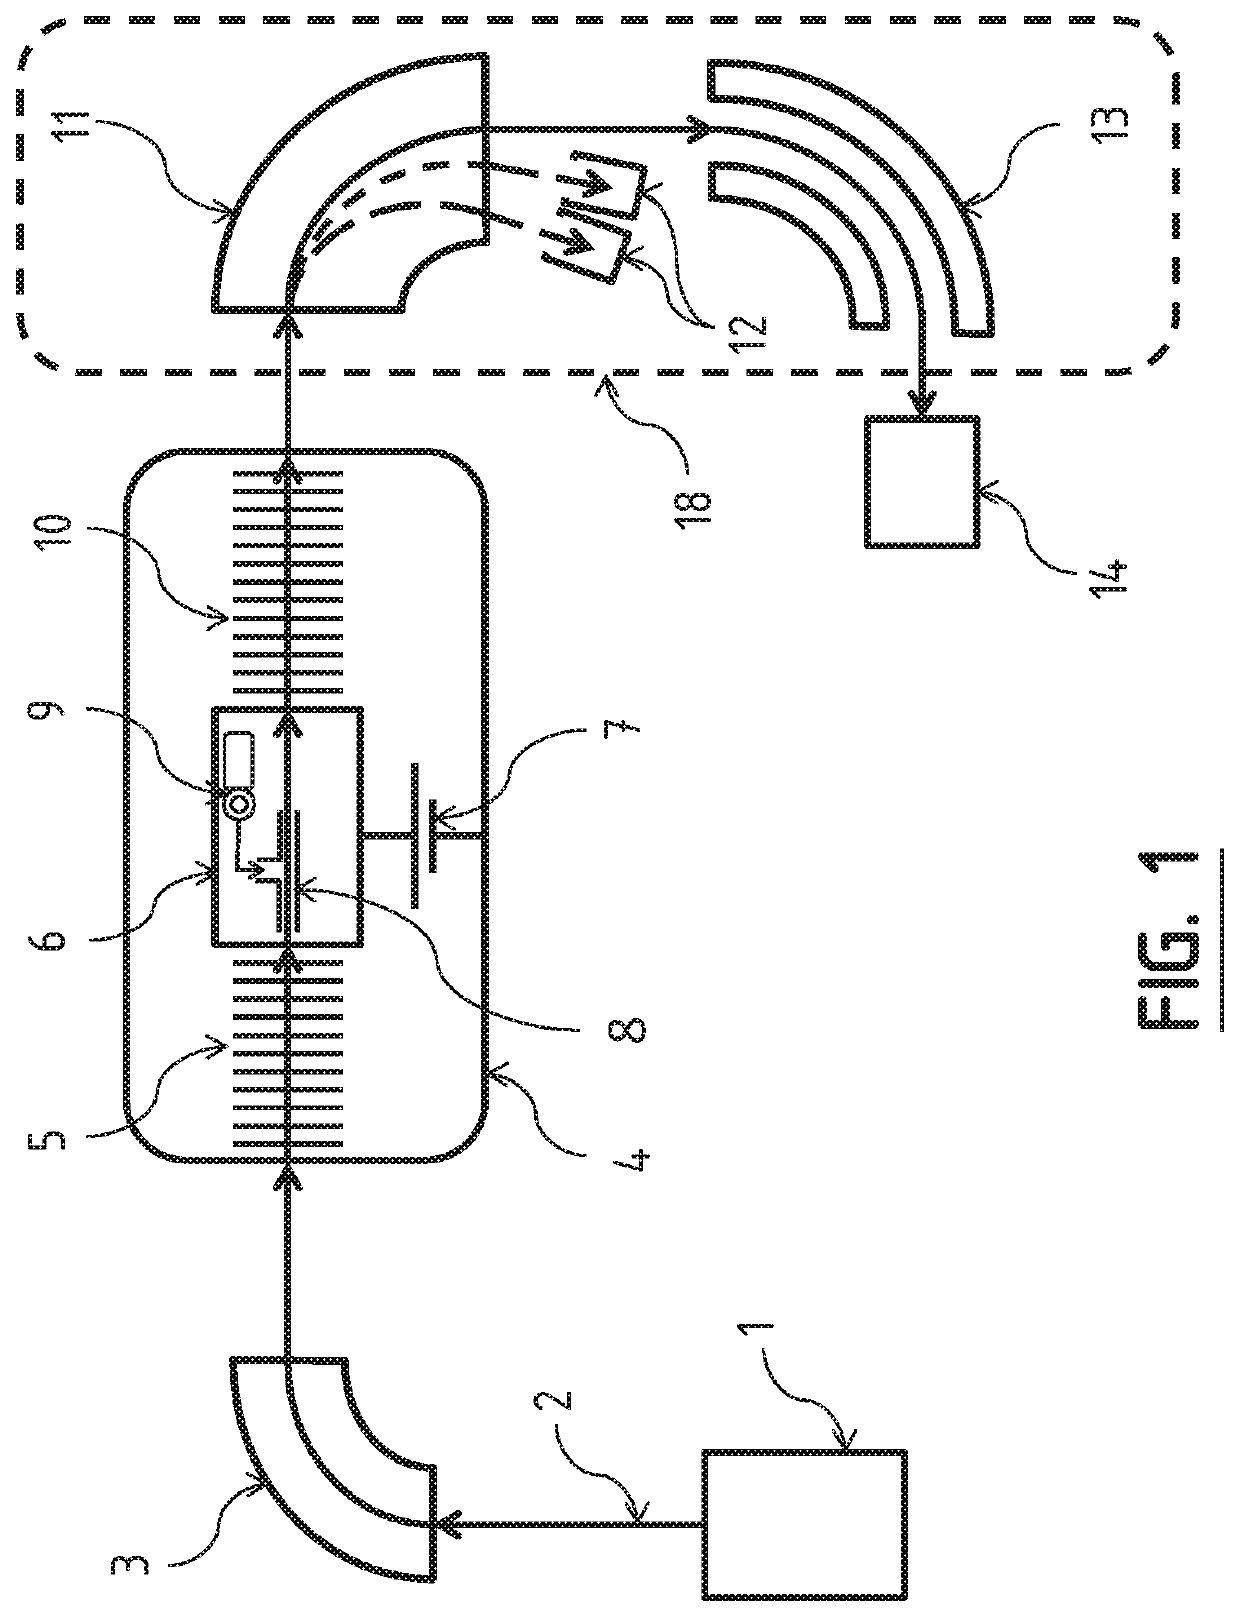 Accelerator mass spectrometry system and associated method